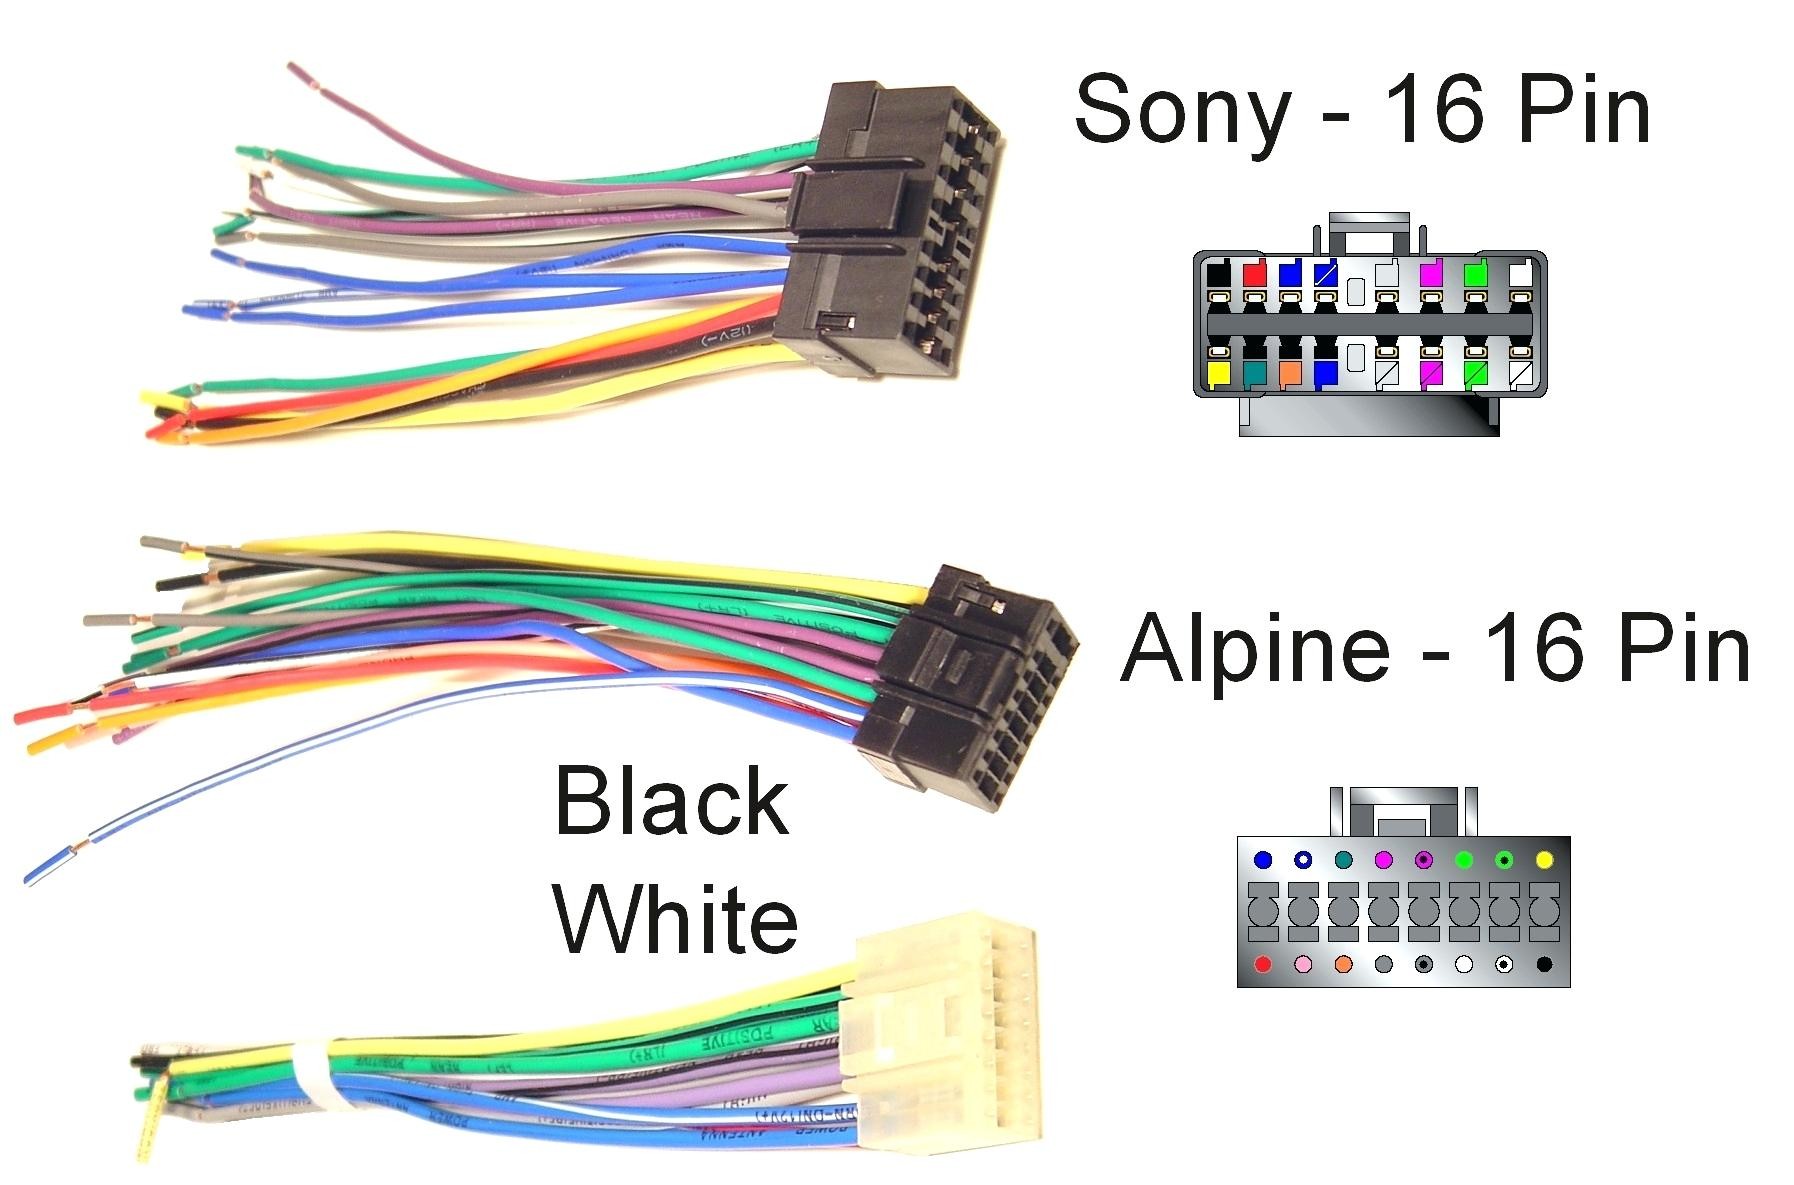 Wiring Diagram for Alpine Car Stereo Wiring Diagram Kenwood Car Stereo Perfect with Additional for A Of Wiring Diagram for Alpine Car Stereo